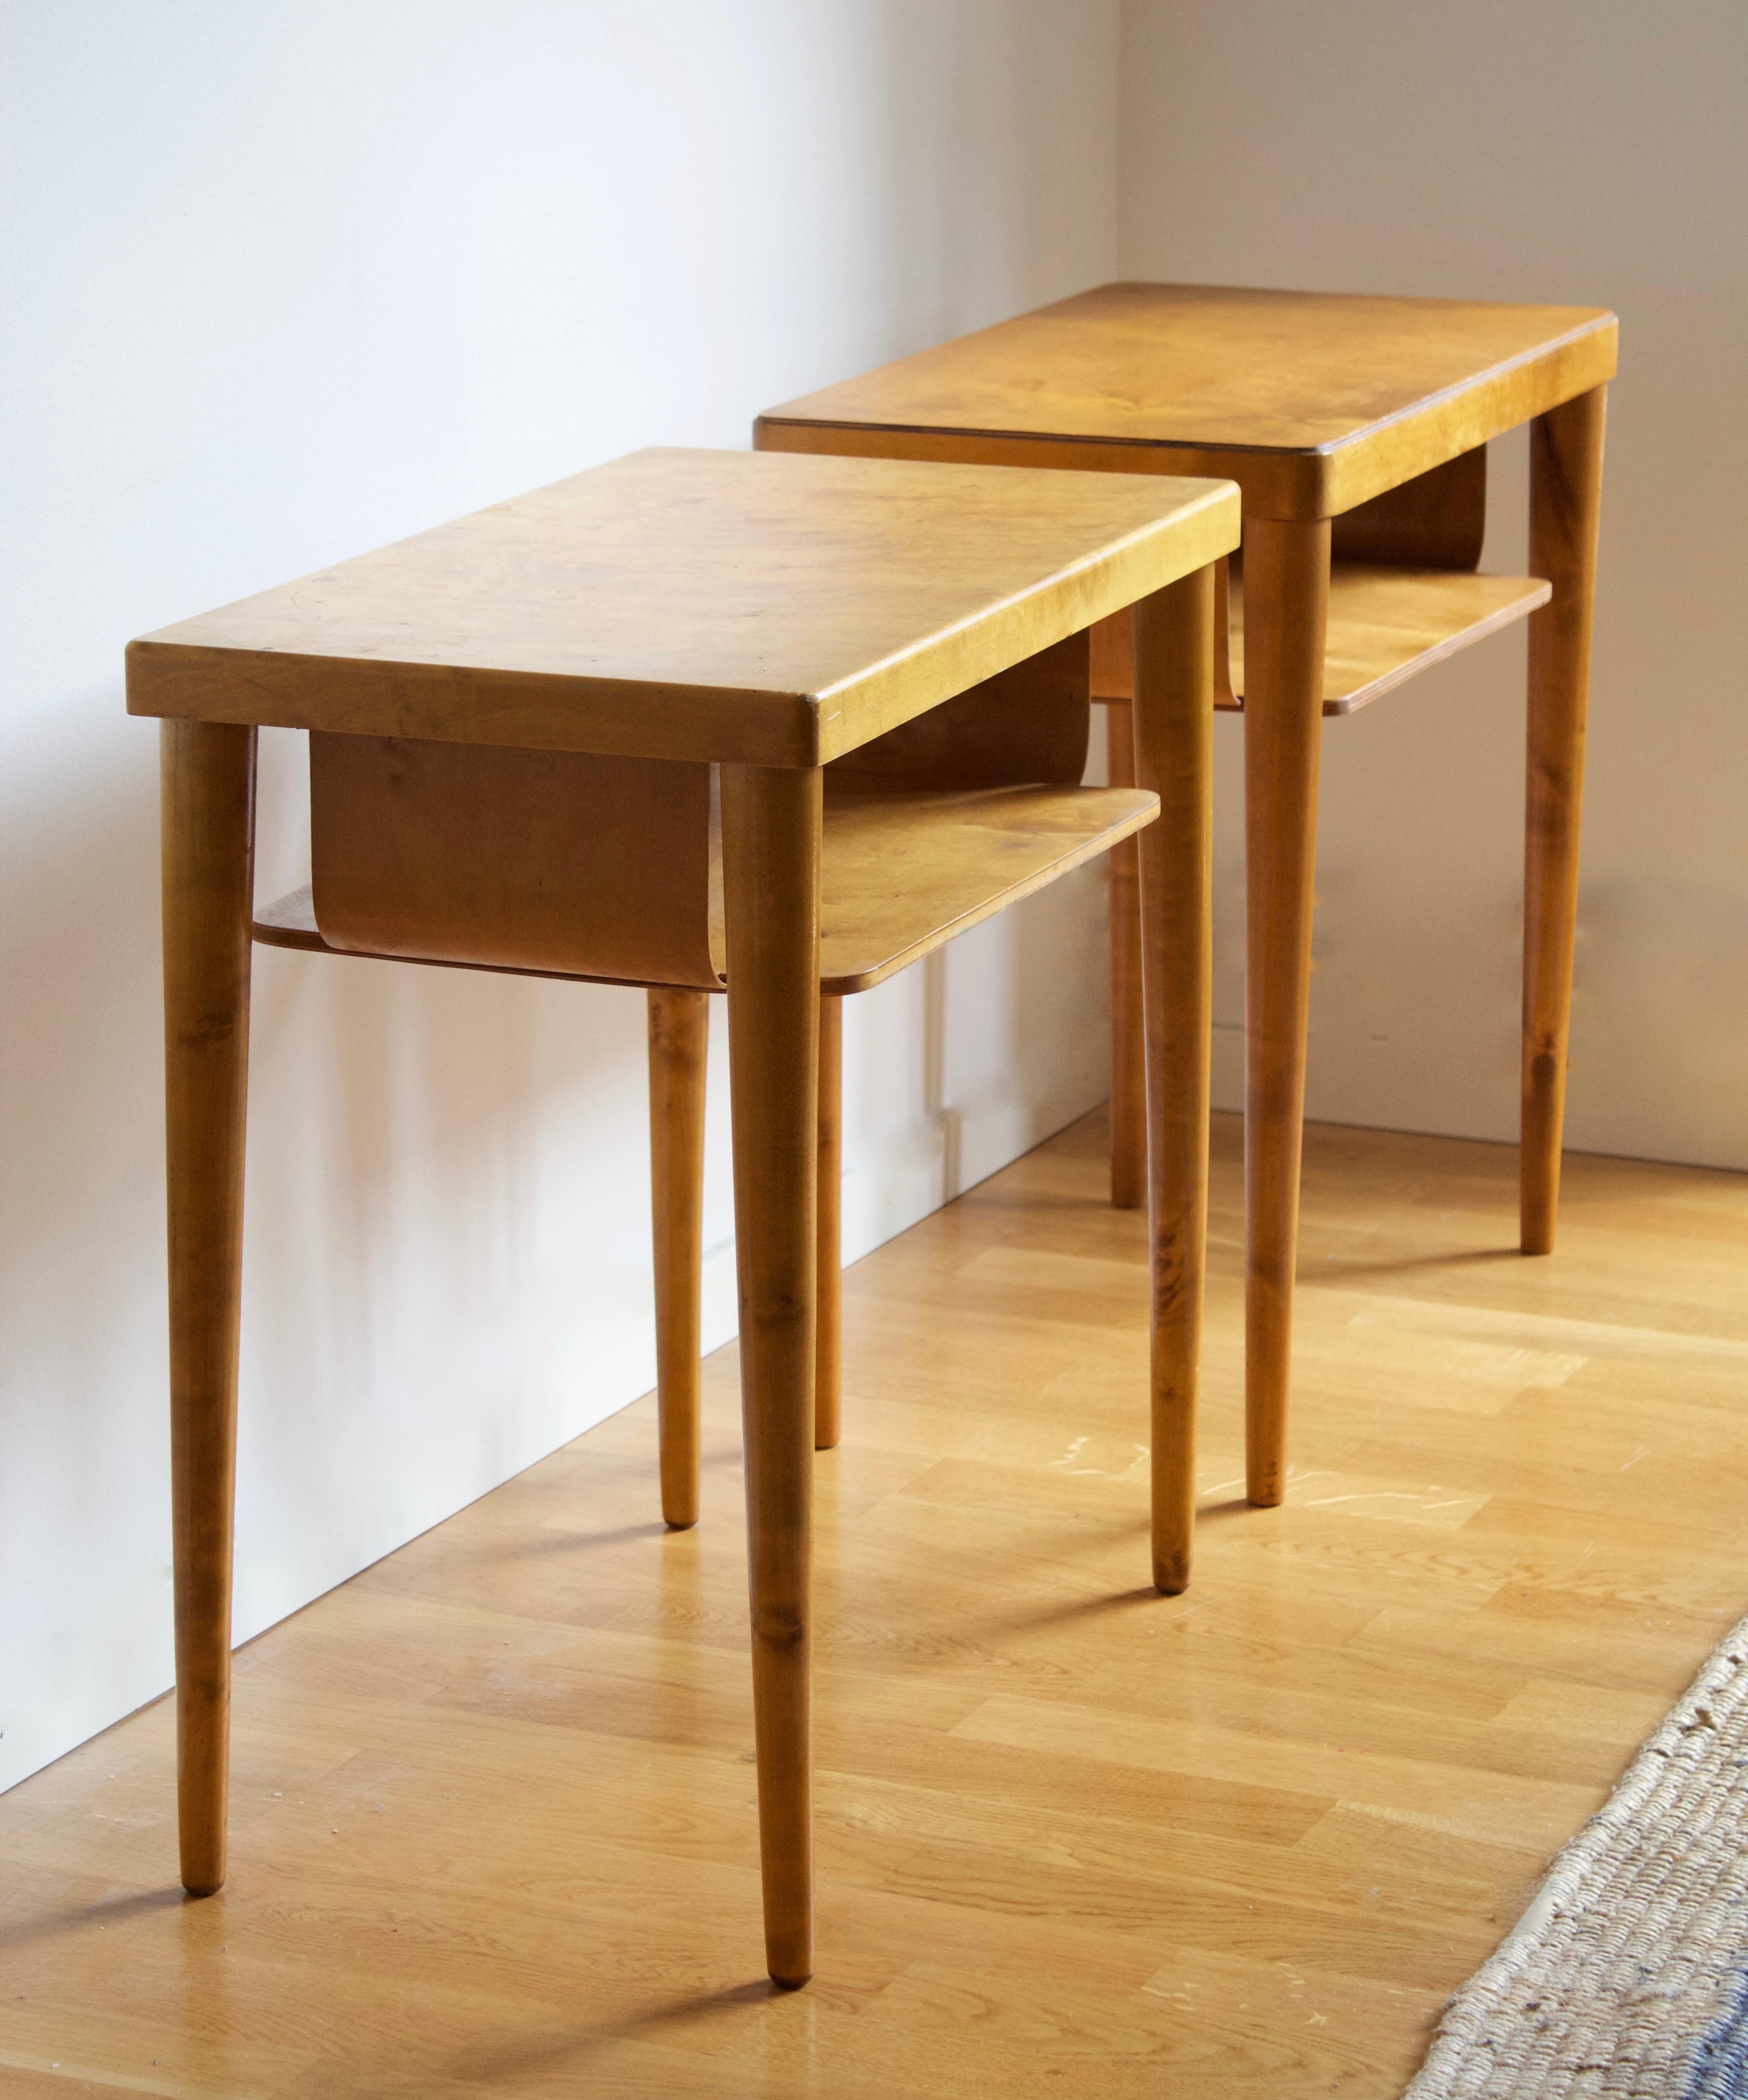 A set of bedside cabinets / tables / nightstands. Designed and produced in Sweden, 1940s. In lacquered birch. 

Other designers working in similar style and materials include Axel Einar Hjorth, Roland Wilhelmsson, Pierre Chapo, and Charlotte